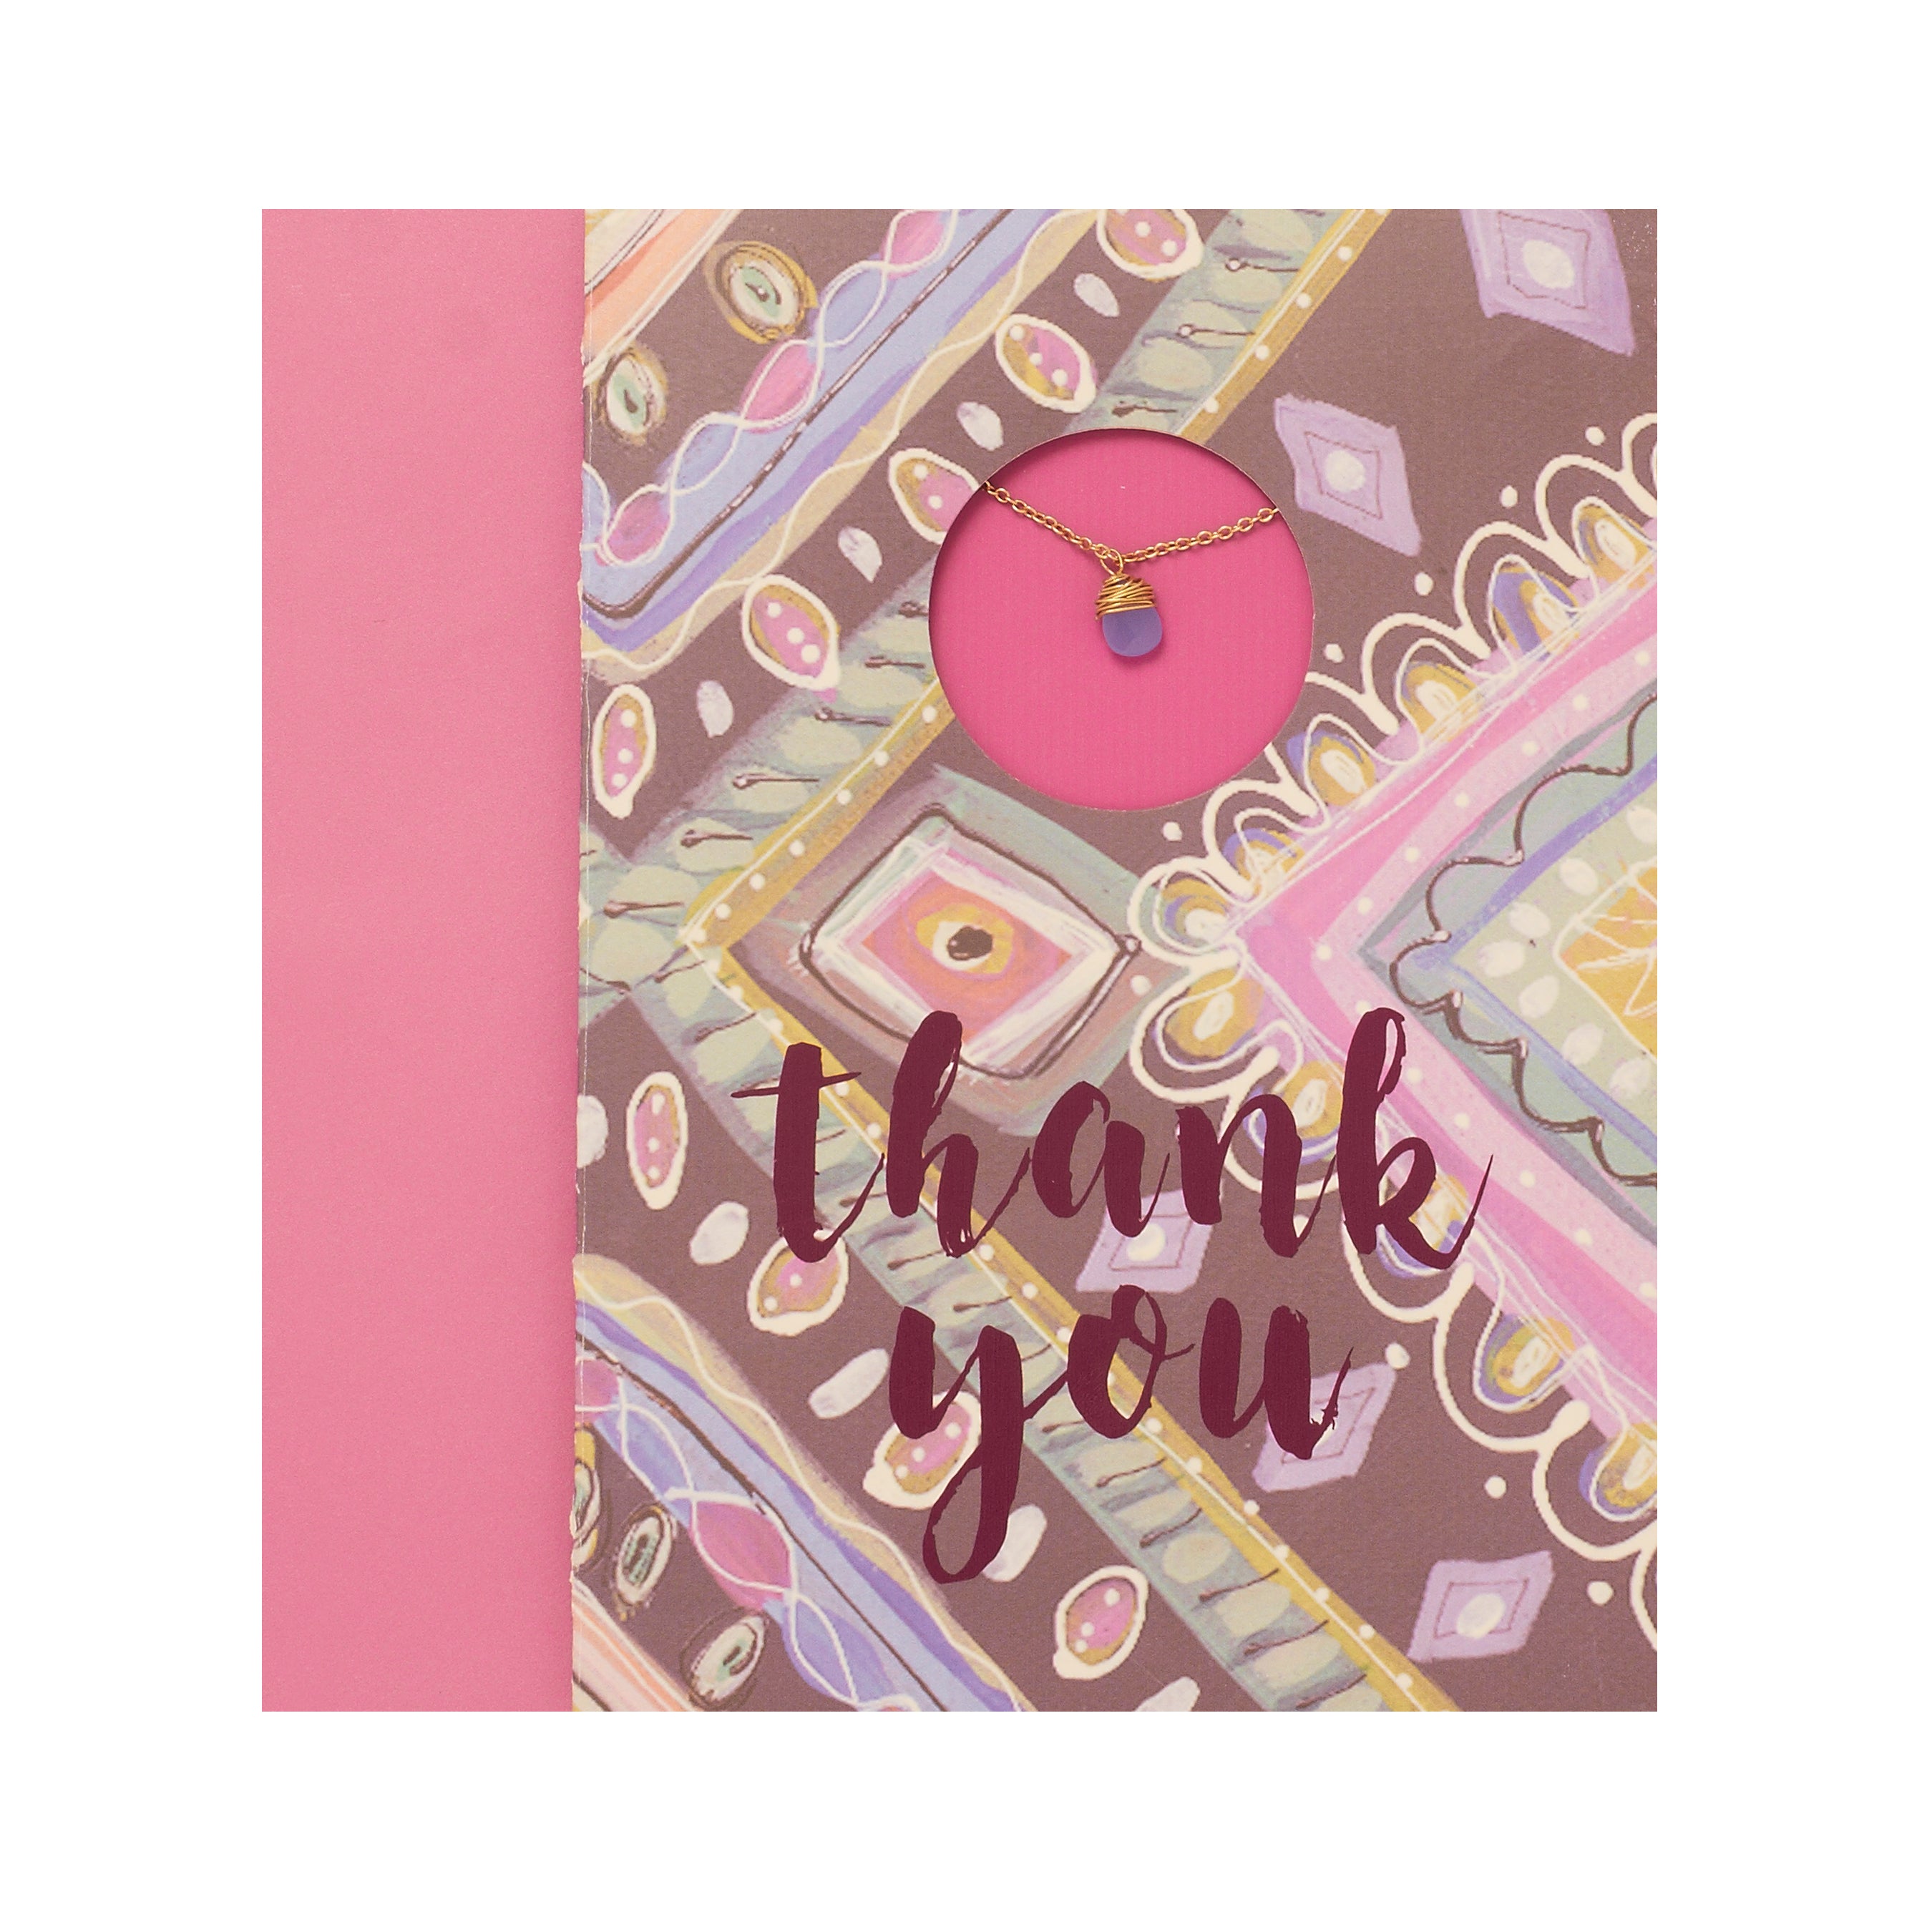 4 Pack of Greeting Cards With Necklace-"Thank You"